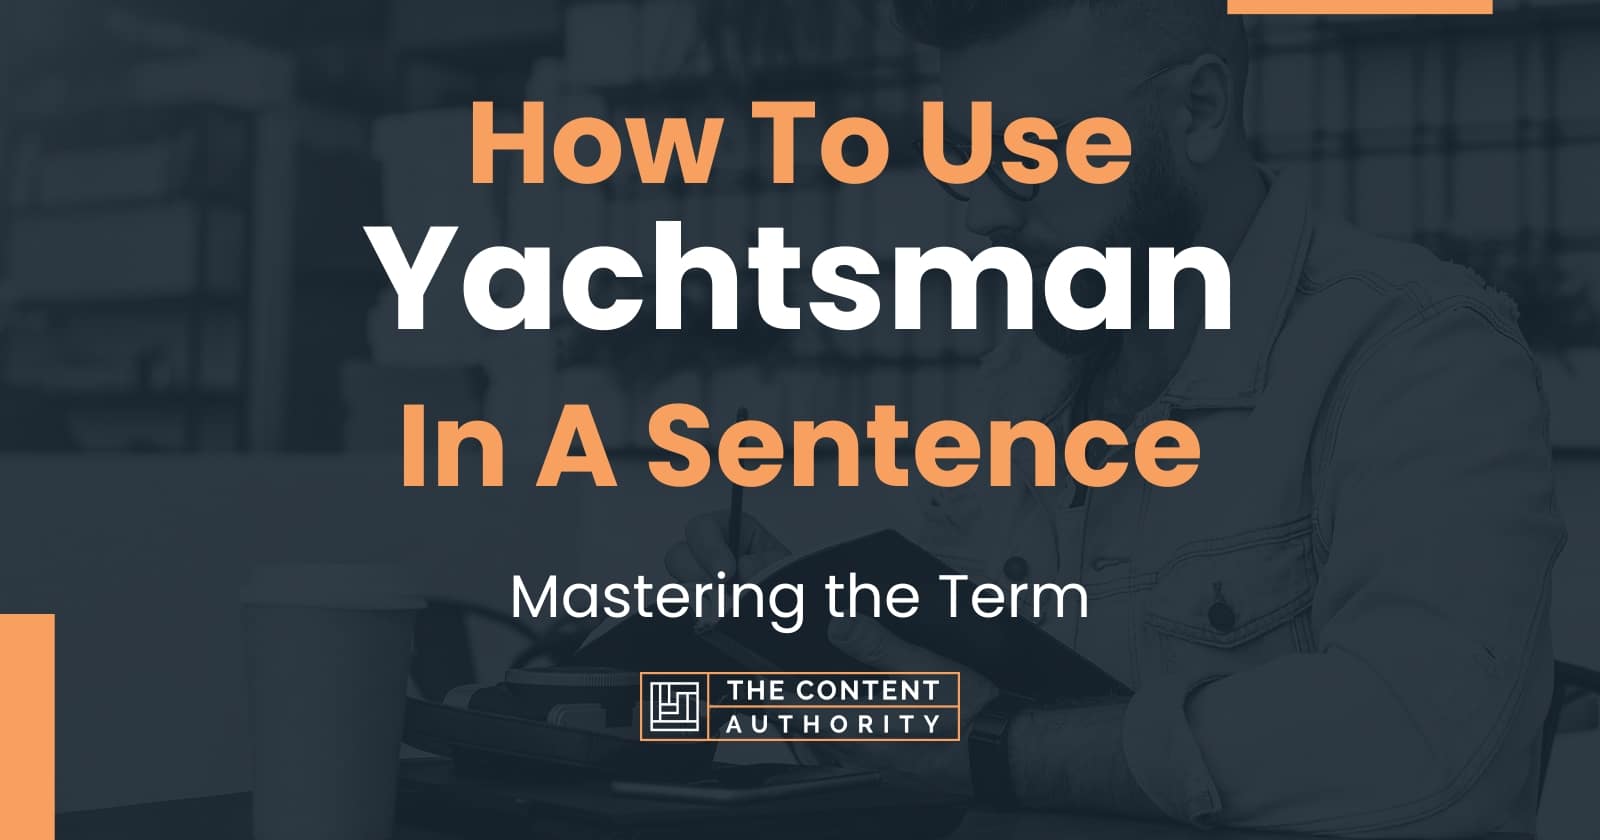 is yachtsman a word